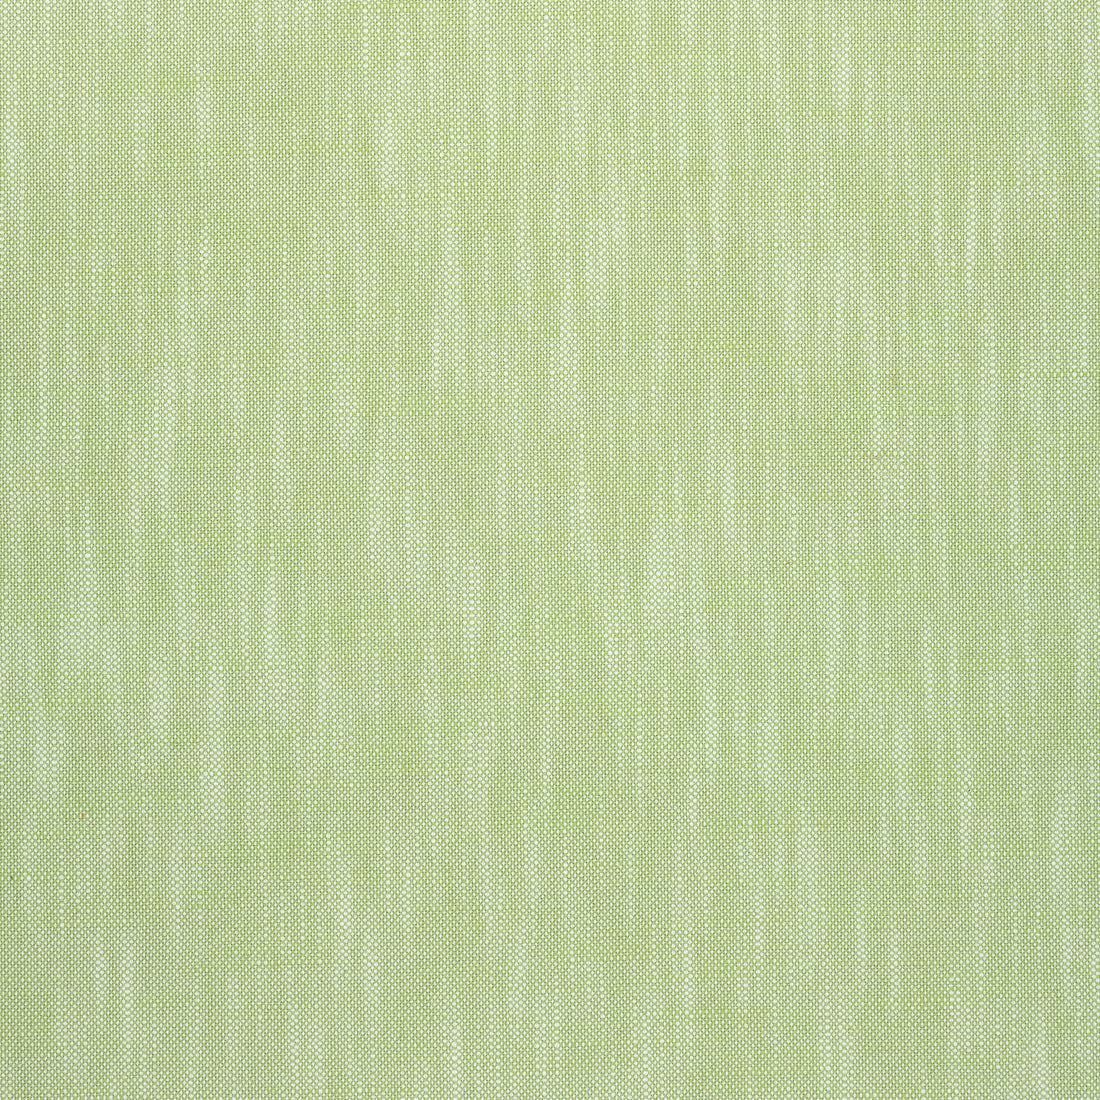 Bristol fabric in green apple color - pattern number W73410 - by Thibaut in the Landmark Textures collection